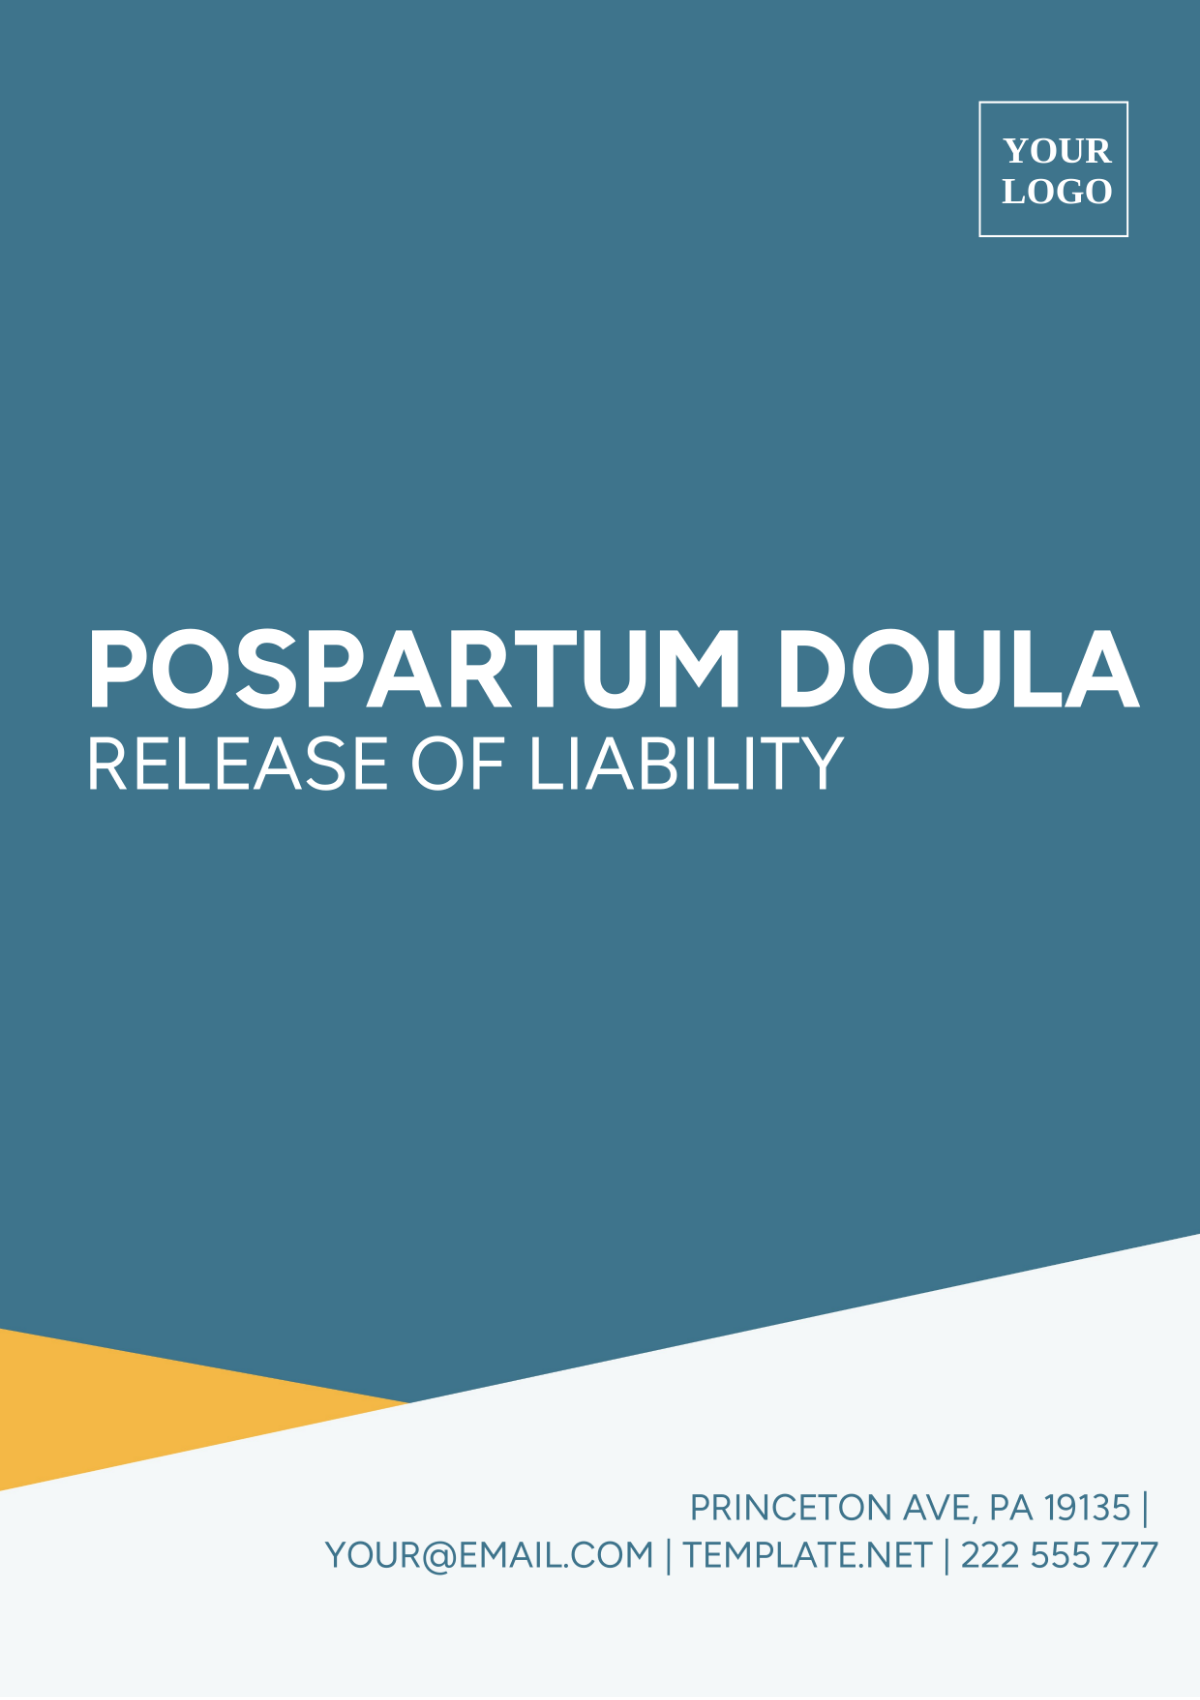 Free Postpartum Doula Release Of Liability Template